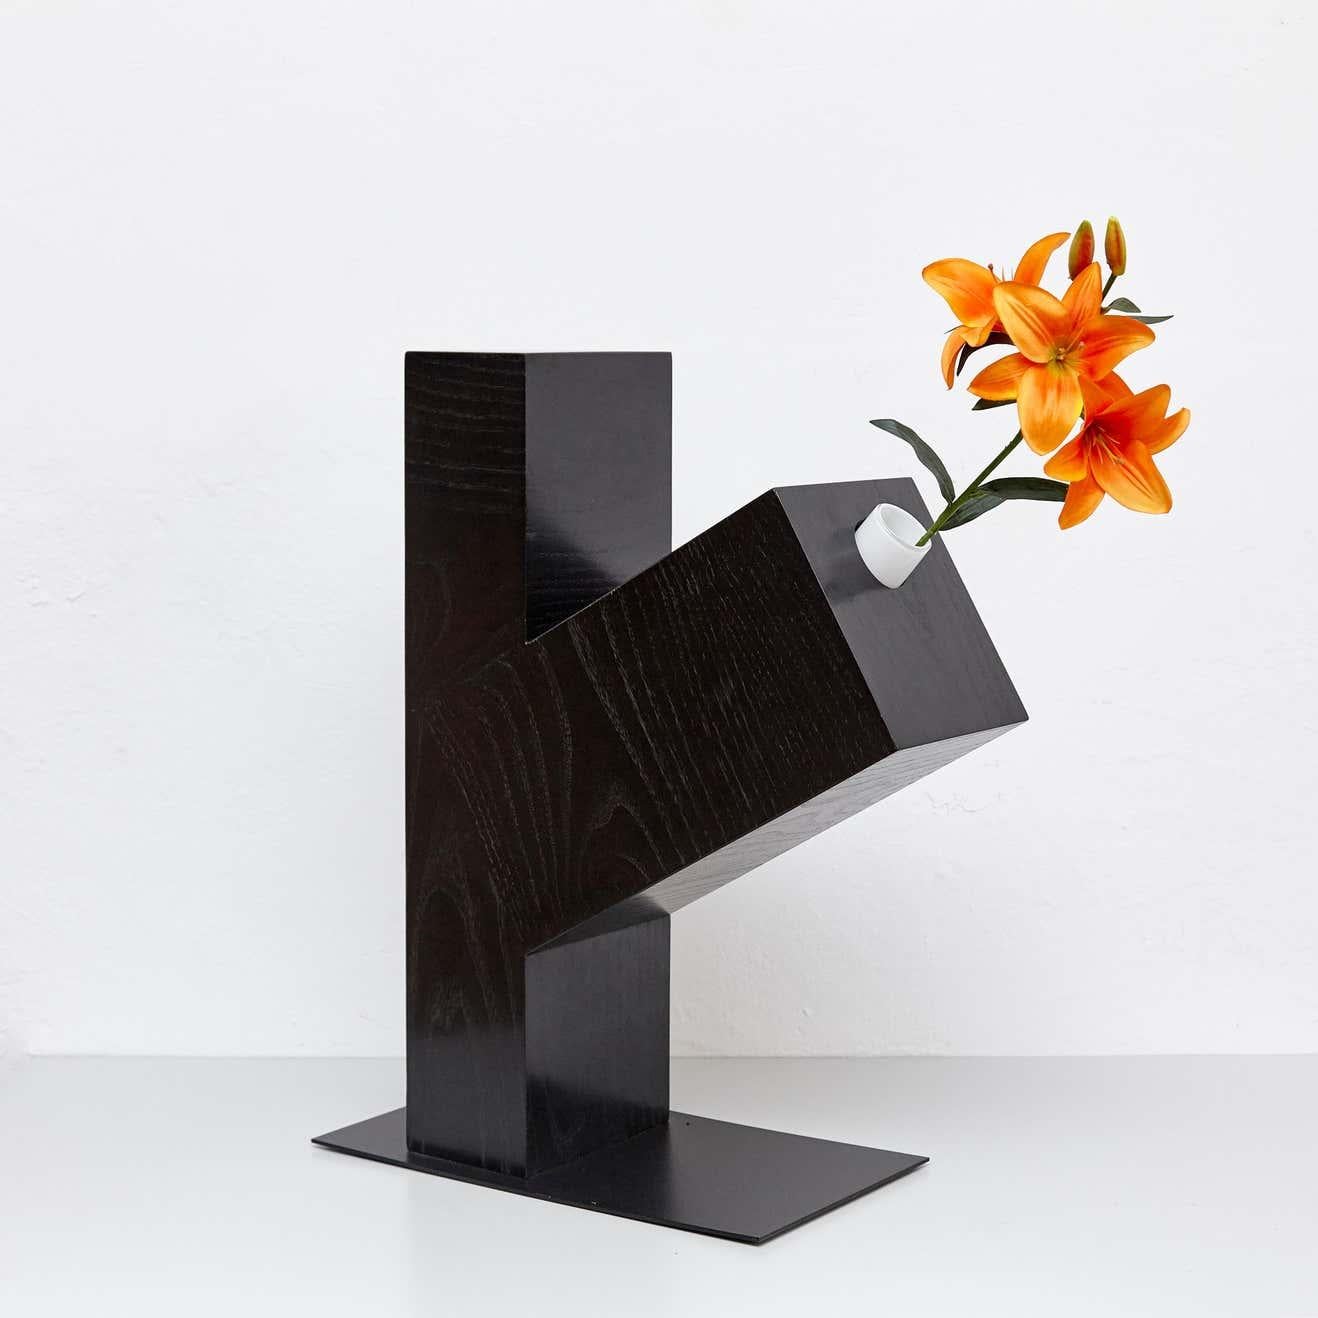 Twenty-seven woods for a Chinese artificial flower vase omega by Ettore Sottsass,
Edited by Design Gallery Milano, 1995.

Limited edition of 12 signed and numbered pieces, number 3 / 12.

In good original condition, with minor wear consistent